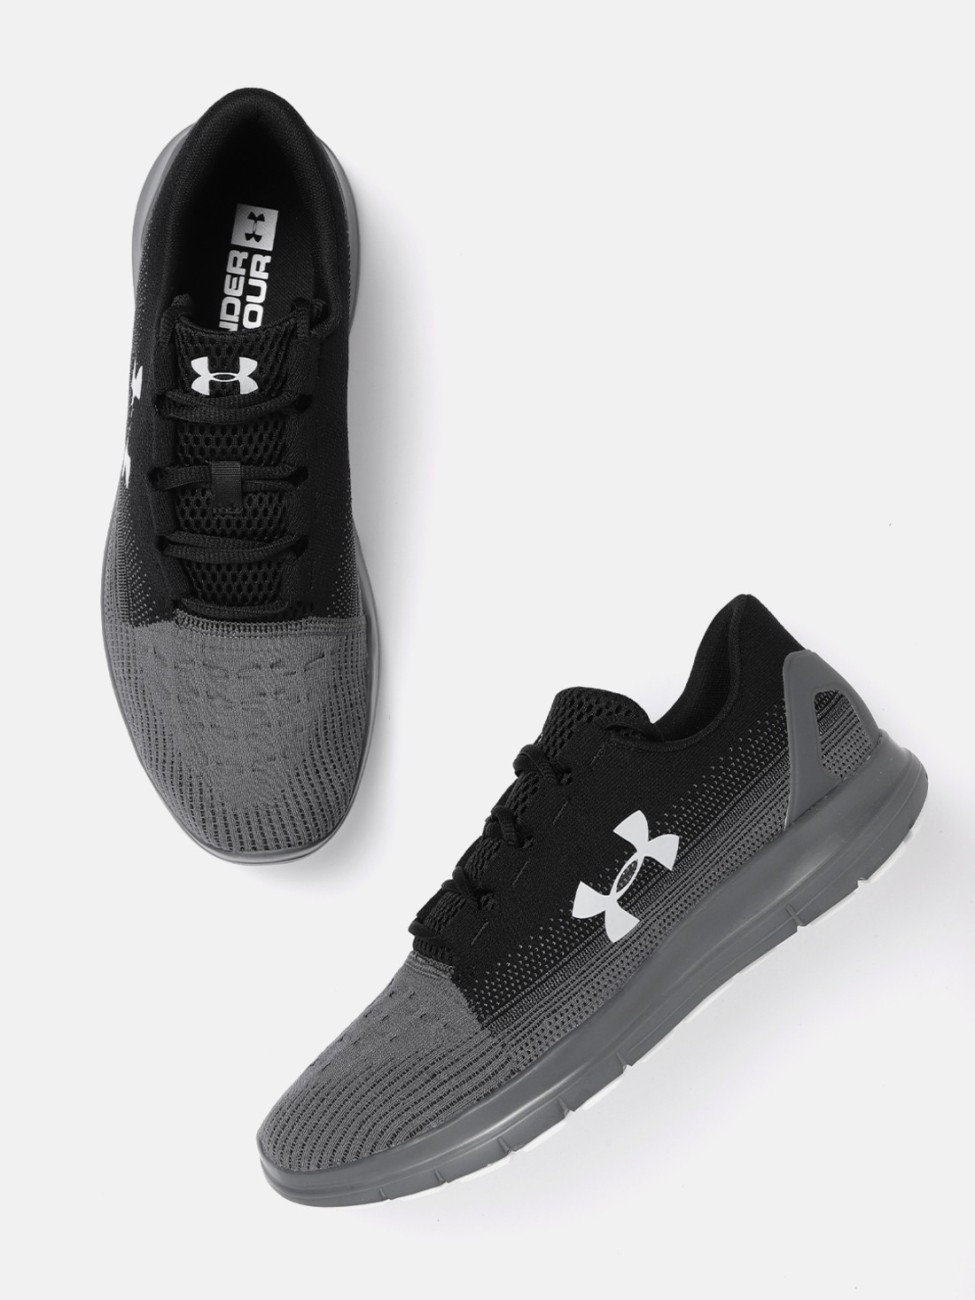 under armour shoes grey and black